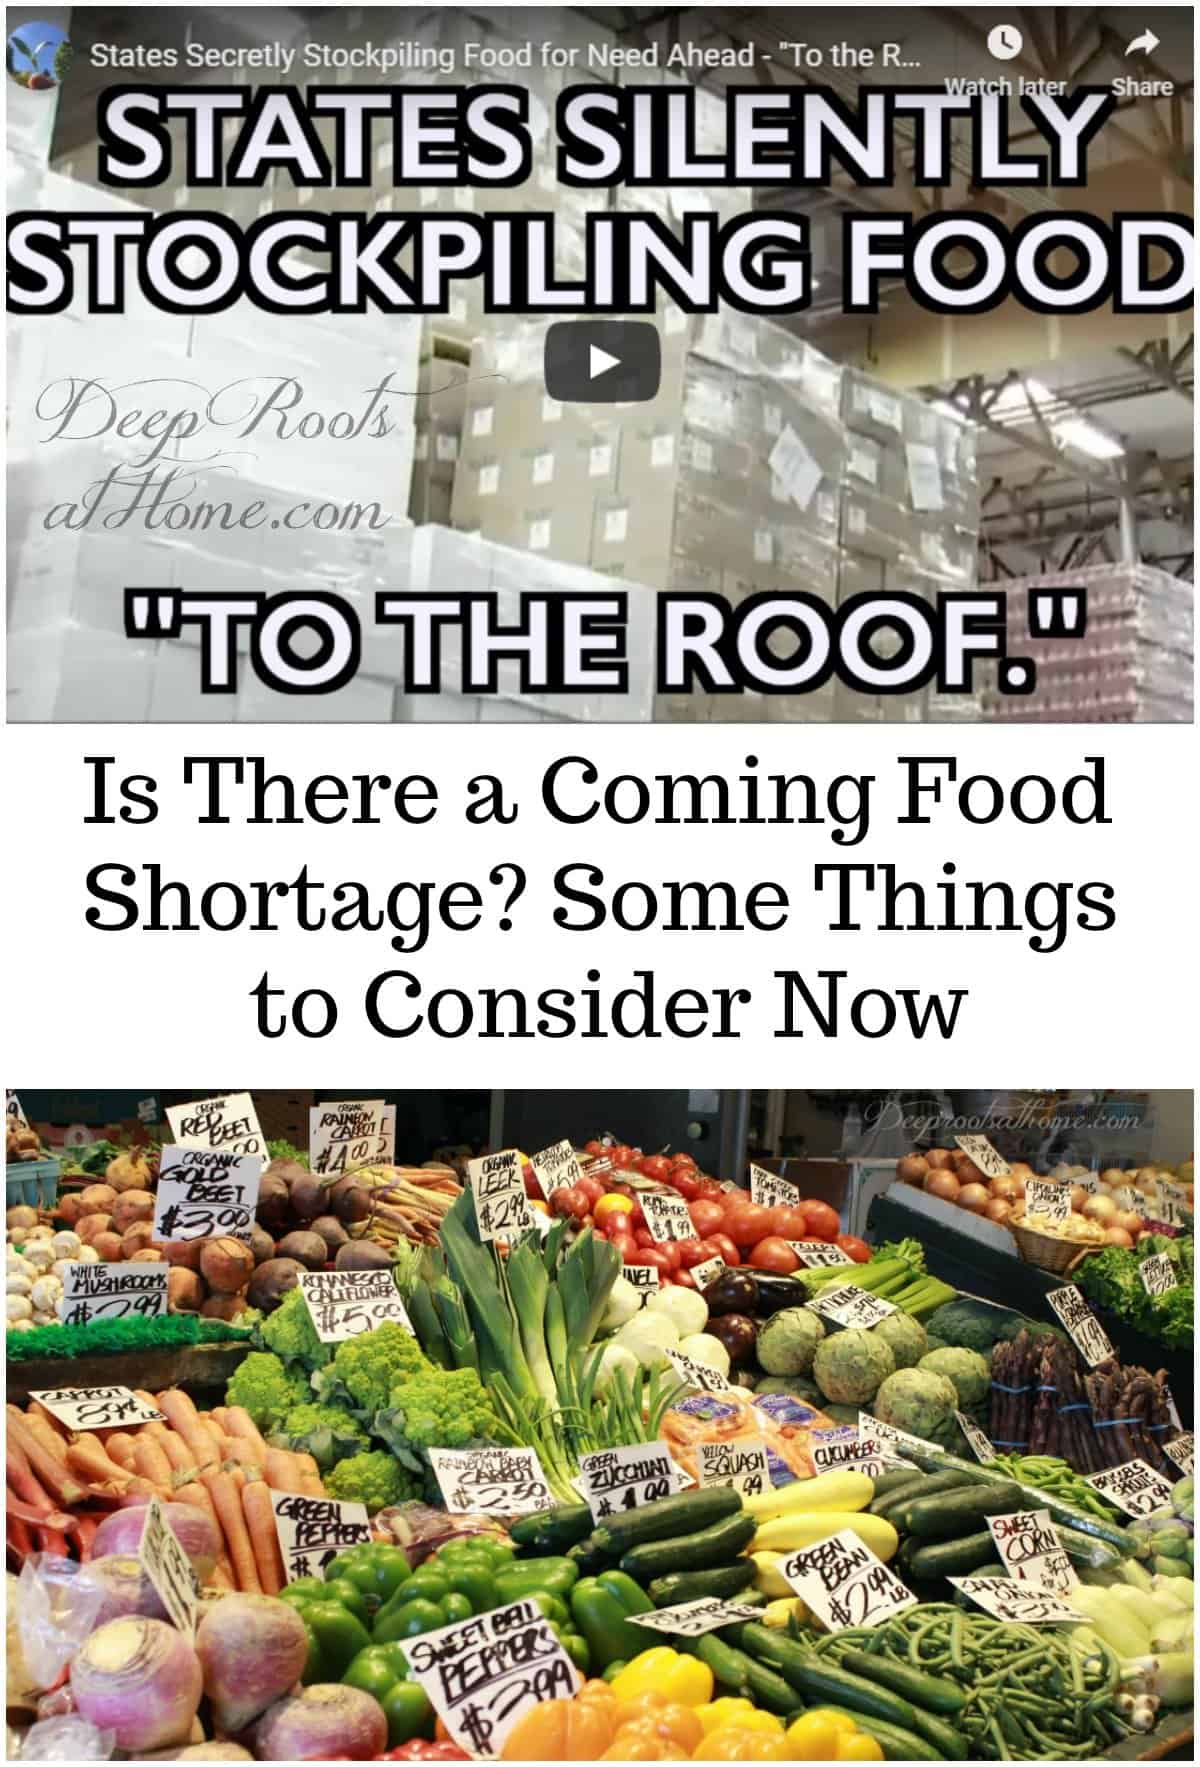 Is There a Coming Food Shortage? Some Things to Consider Now, produce